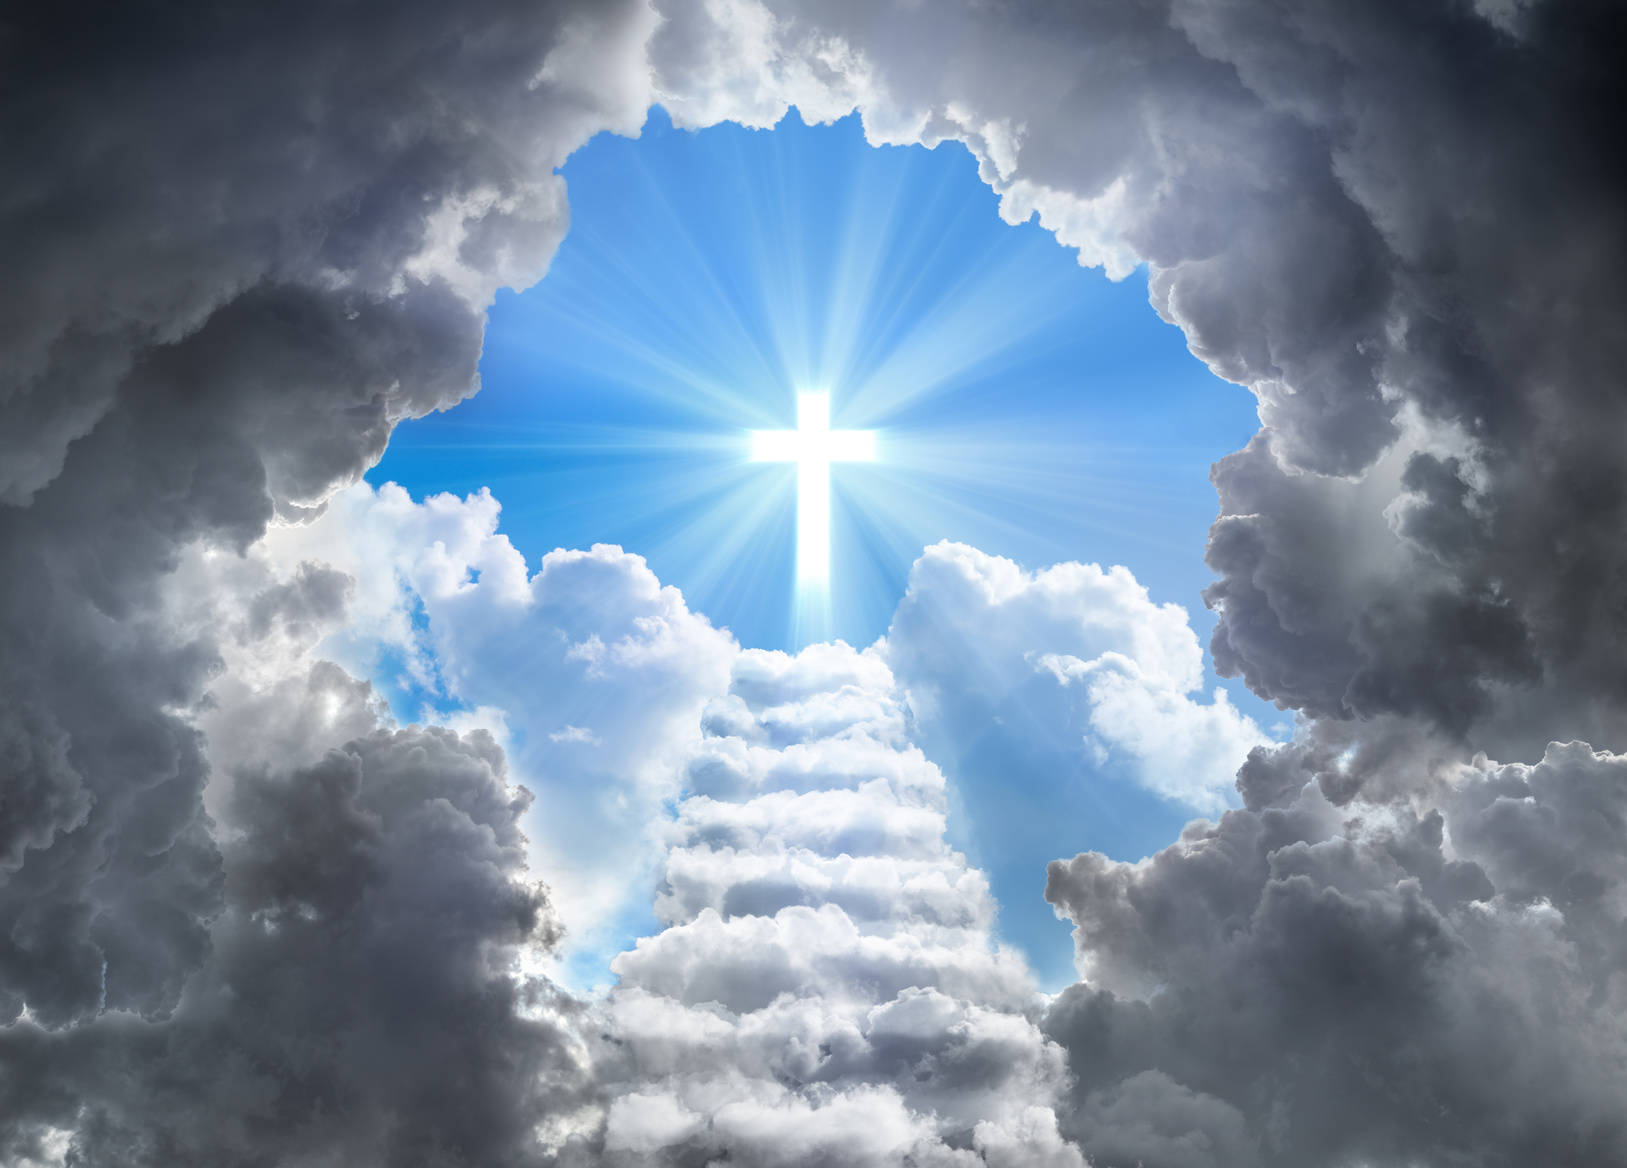 Catholic Funeral Clouds With Cross Wallpaper